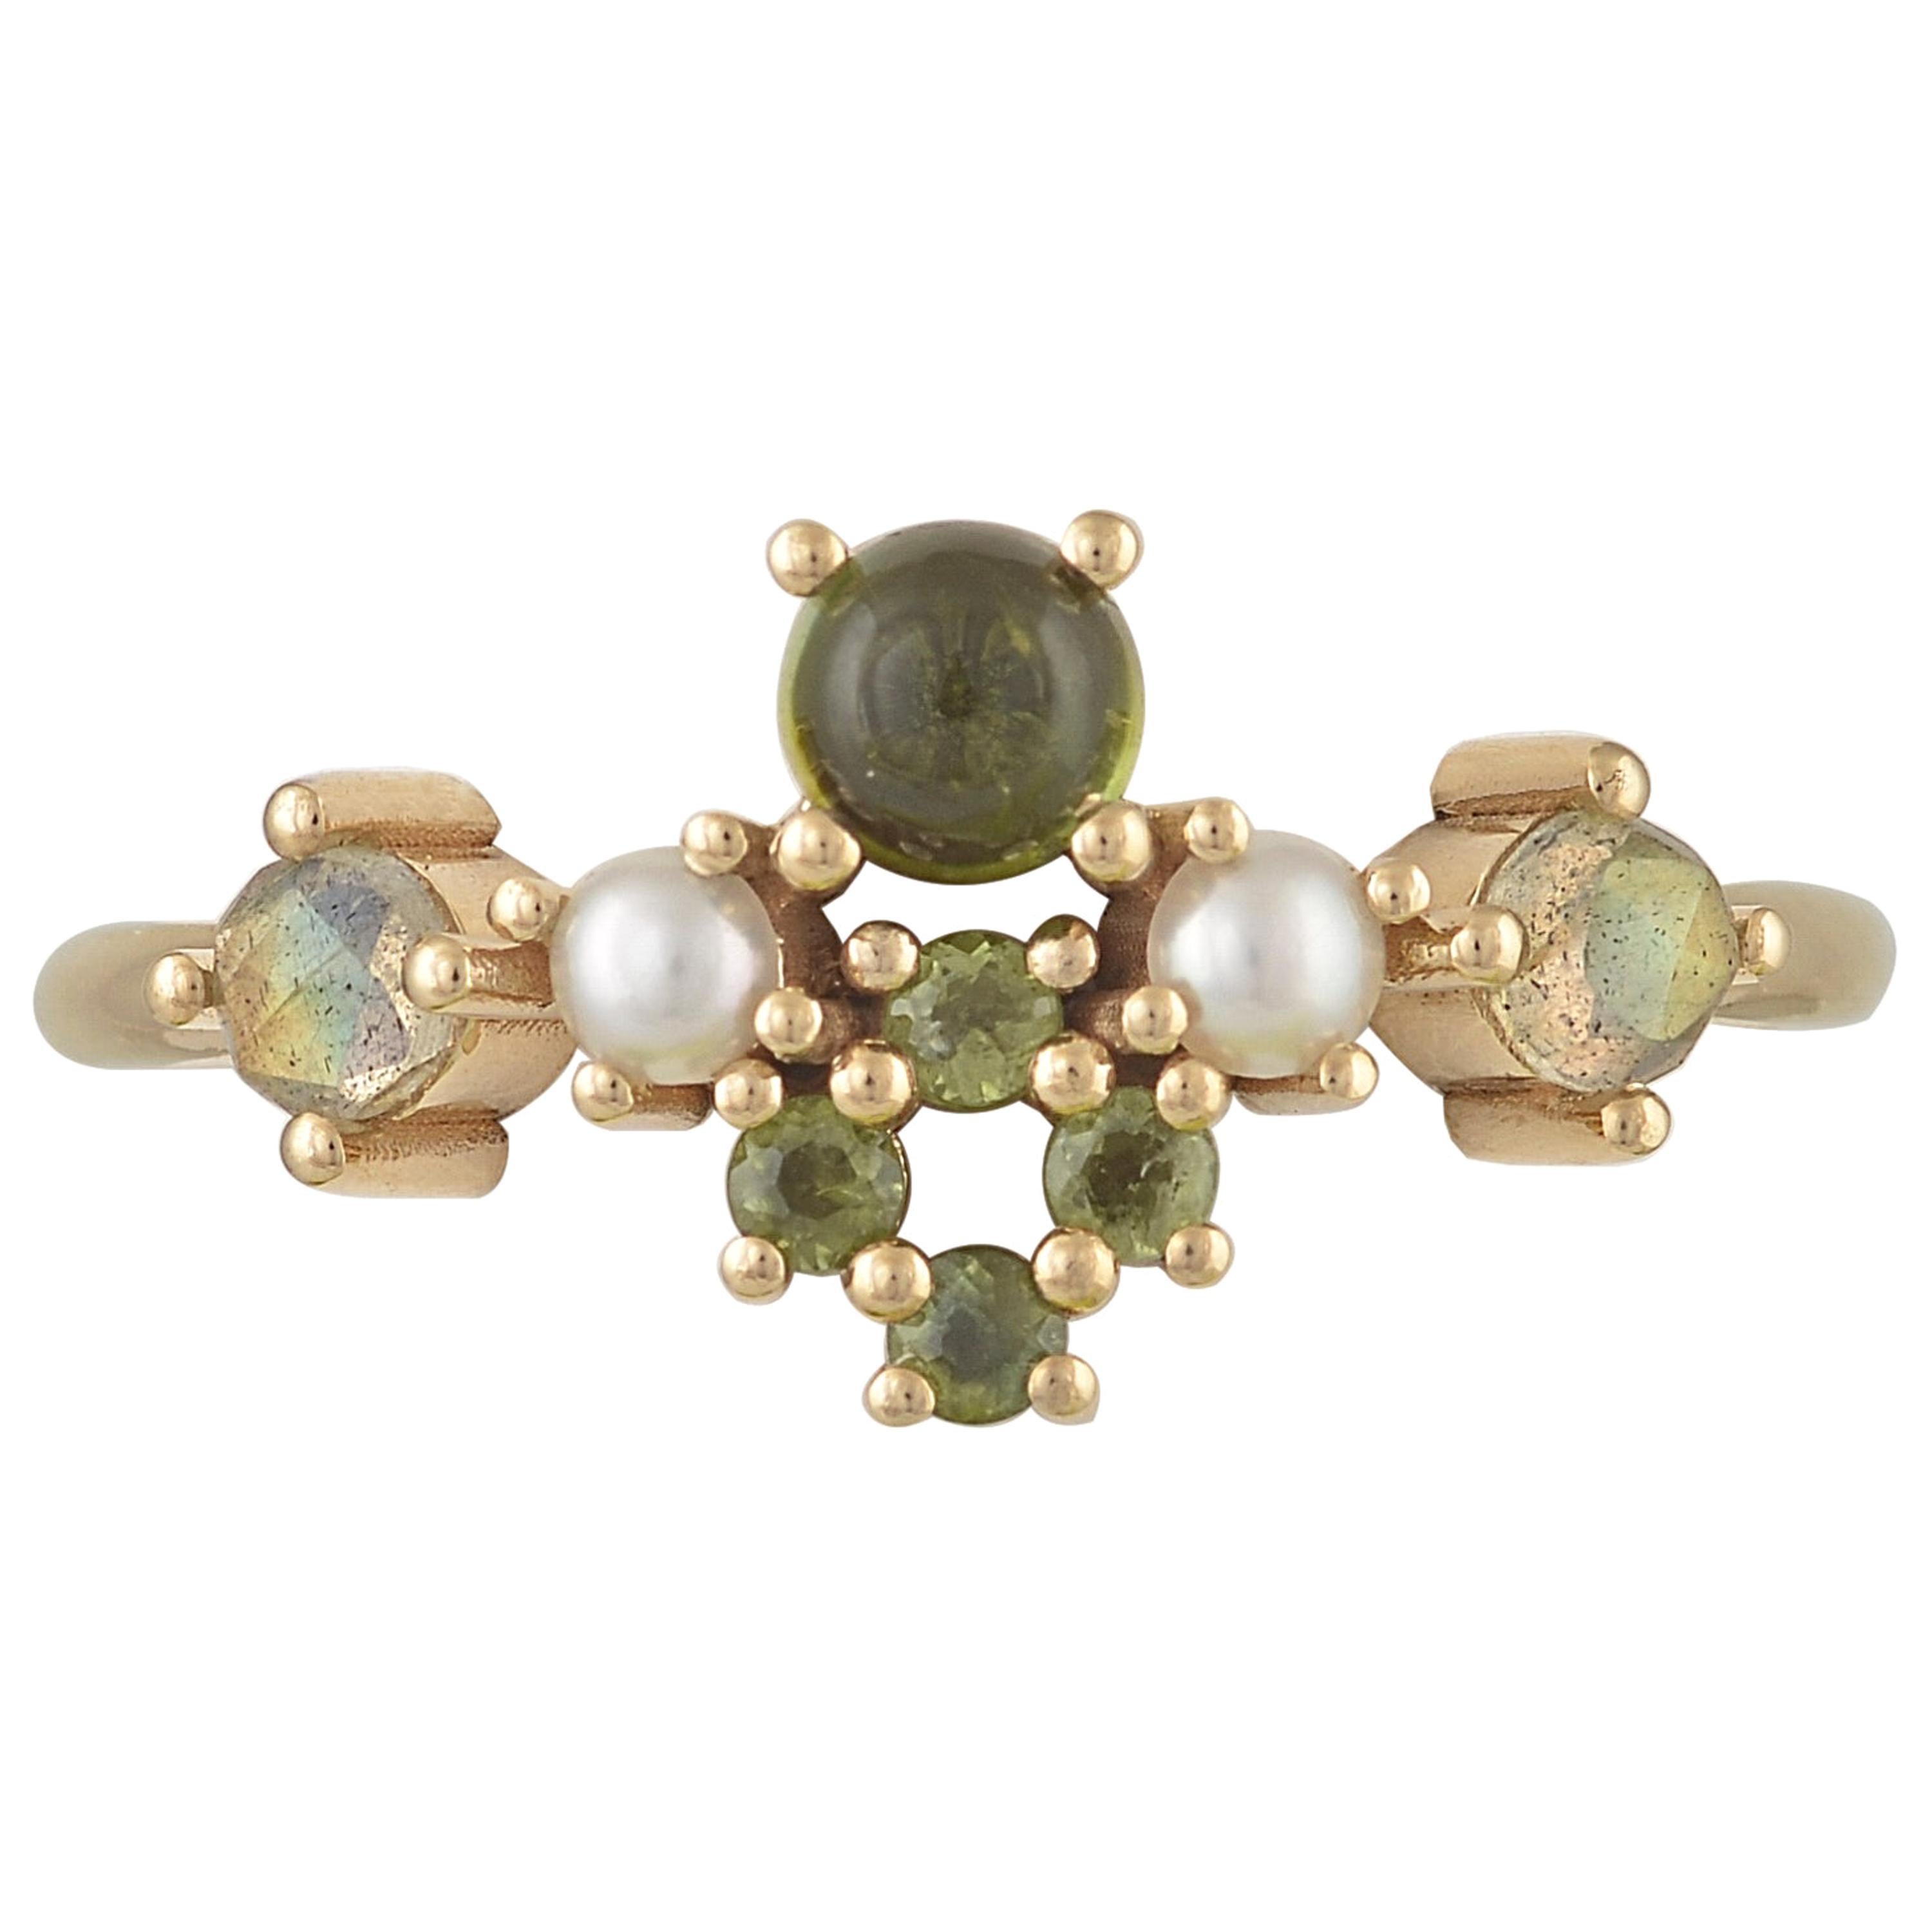 Colourful 18 Karat Gold Ring with Tourmalines, Labradorites and Cultured Pearls